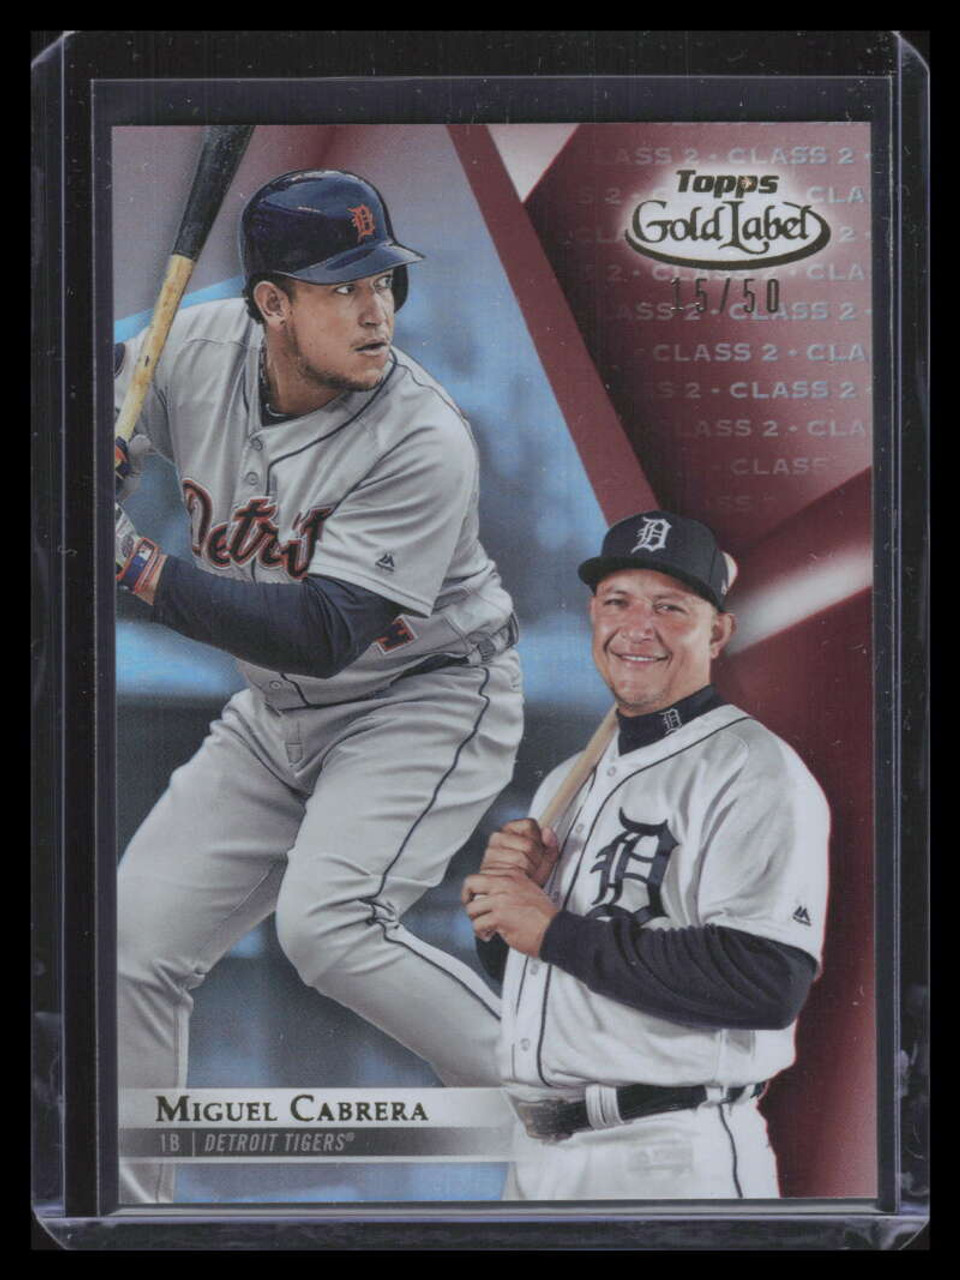 2018 Topps Gold Label Class 2 Red 44 Miguel Cabrera 15/50